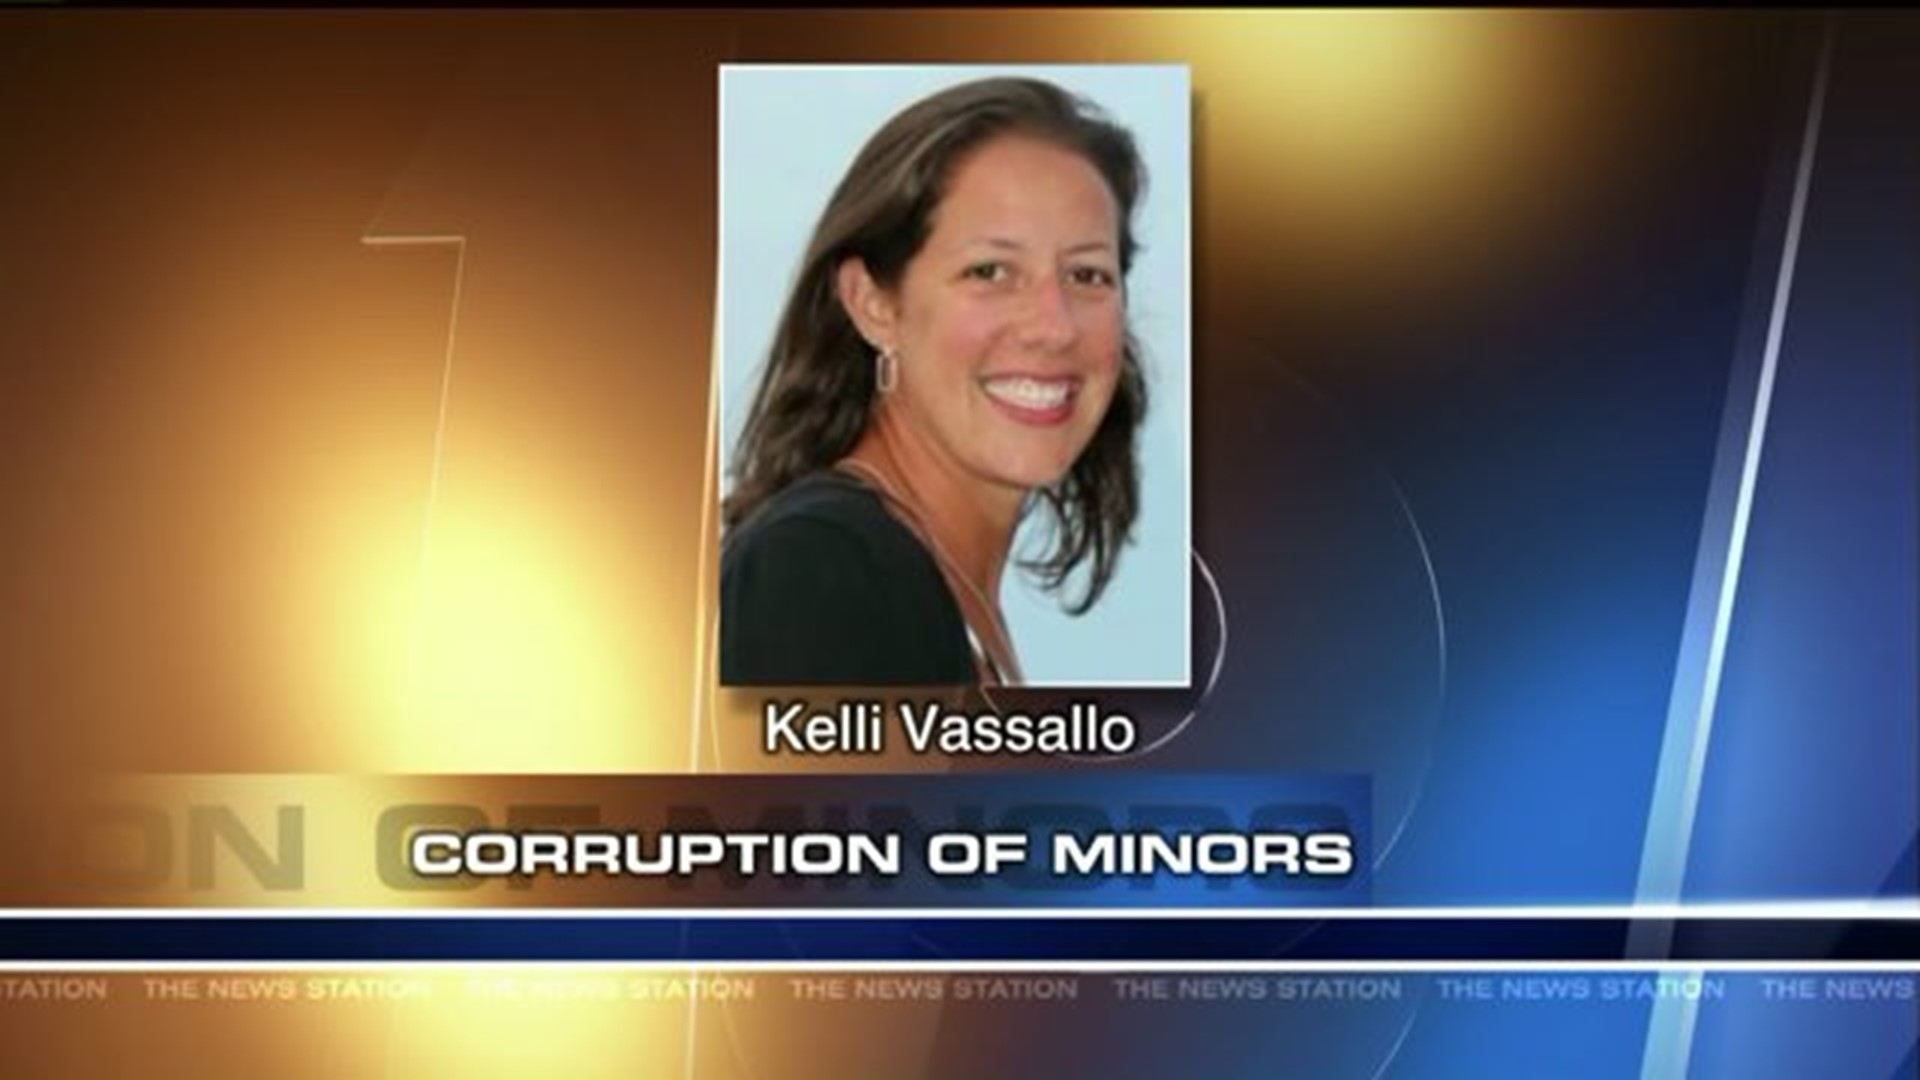 Teacher Suspended, Accused of Sexual Relationships with Underage Students